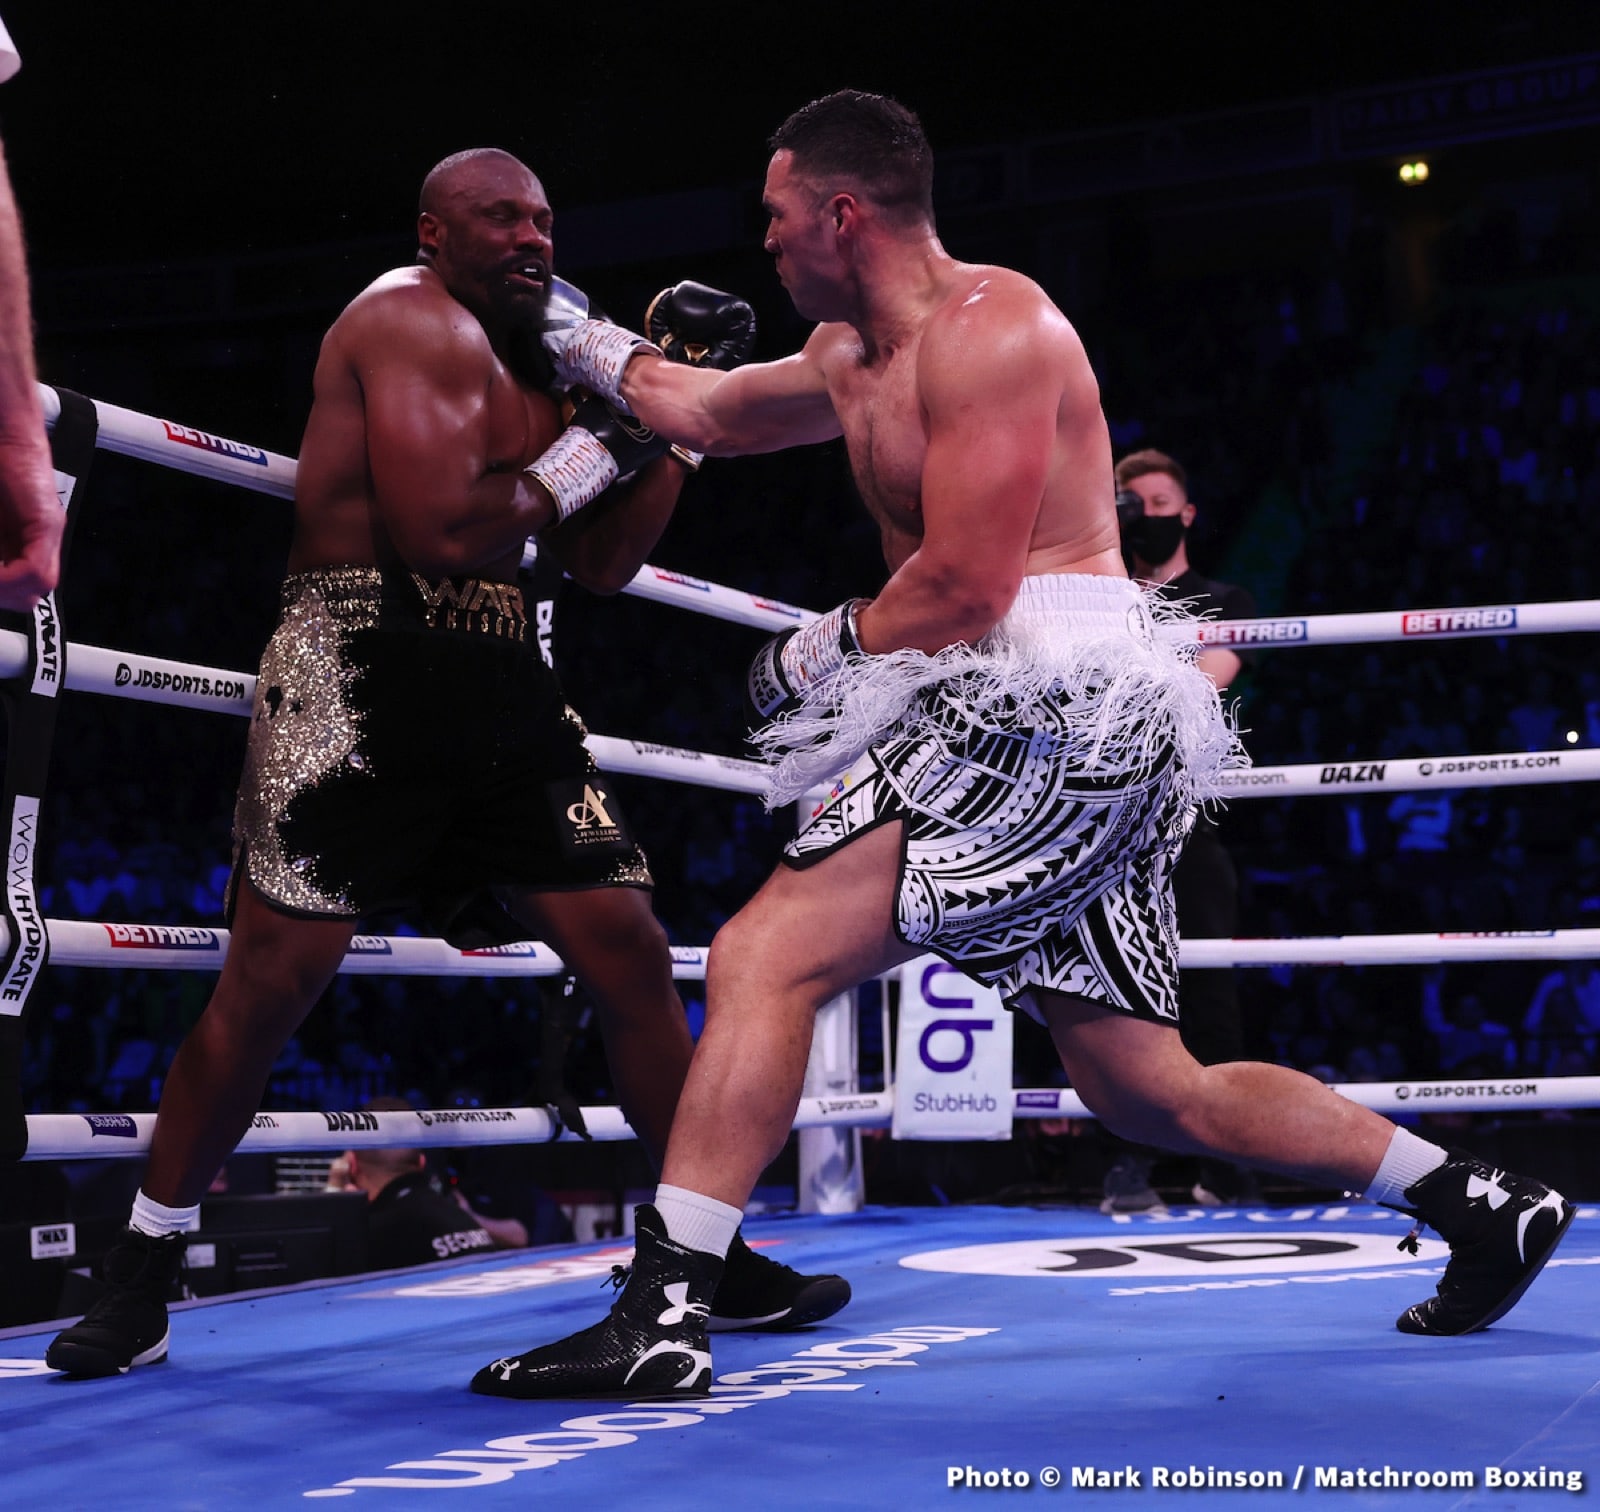 Jack Cullen boxing image / photo